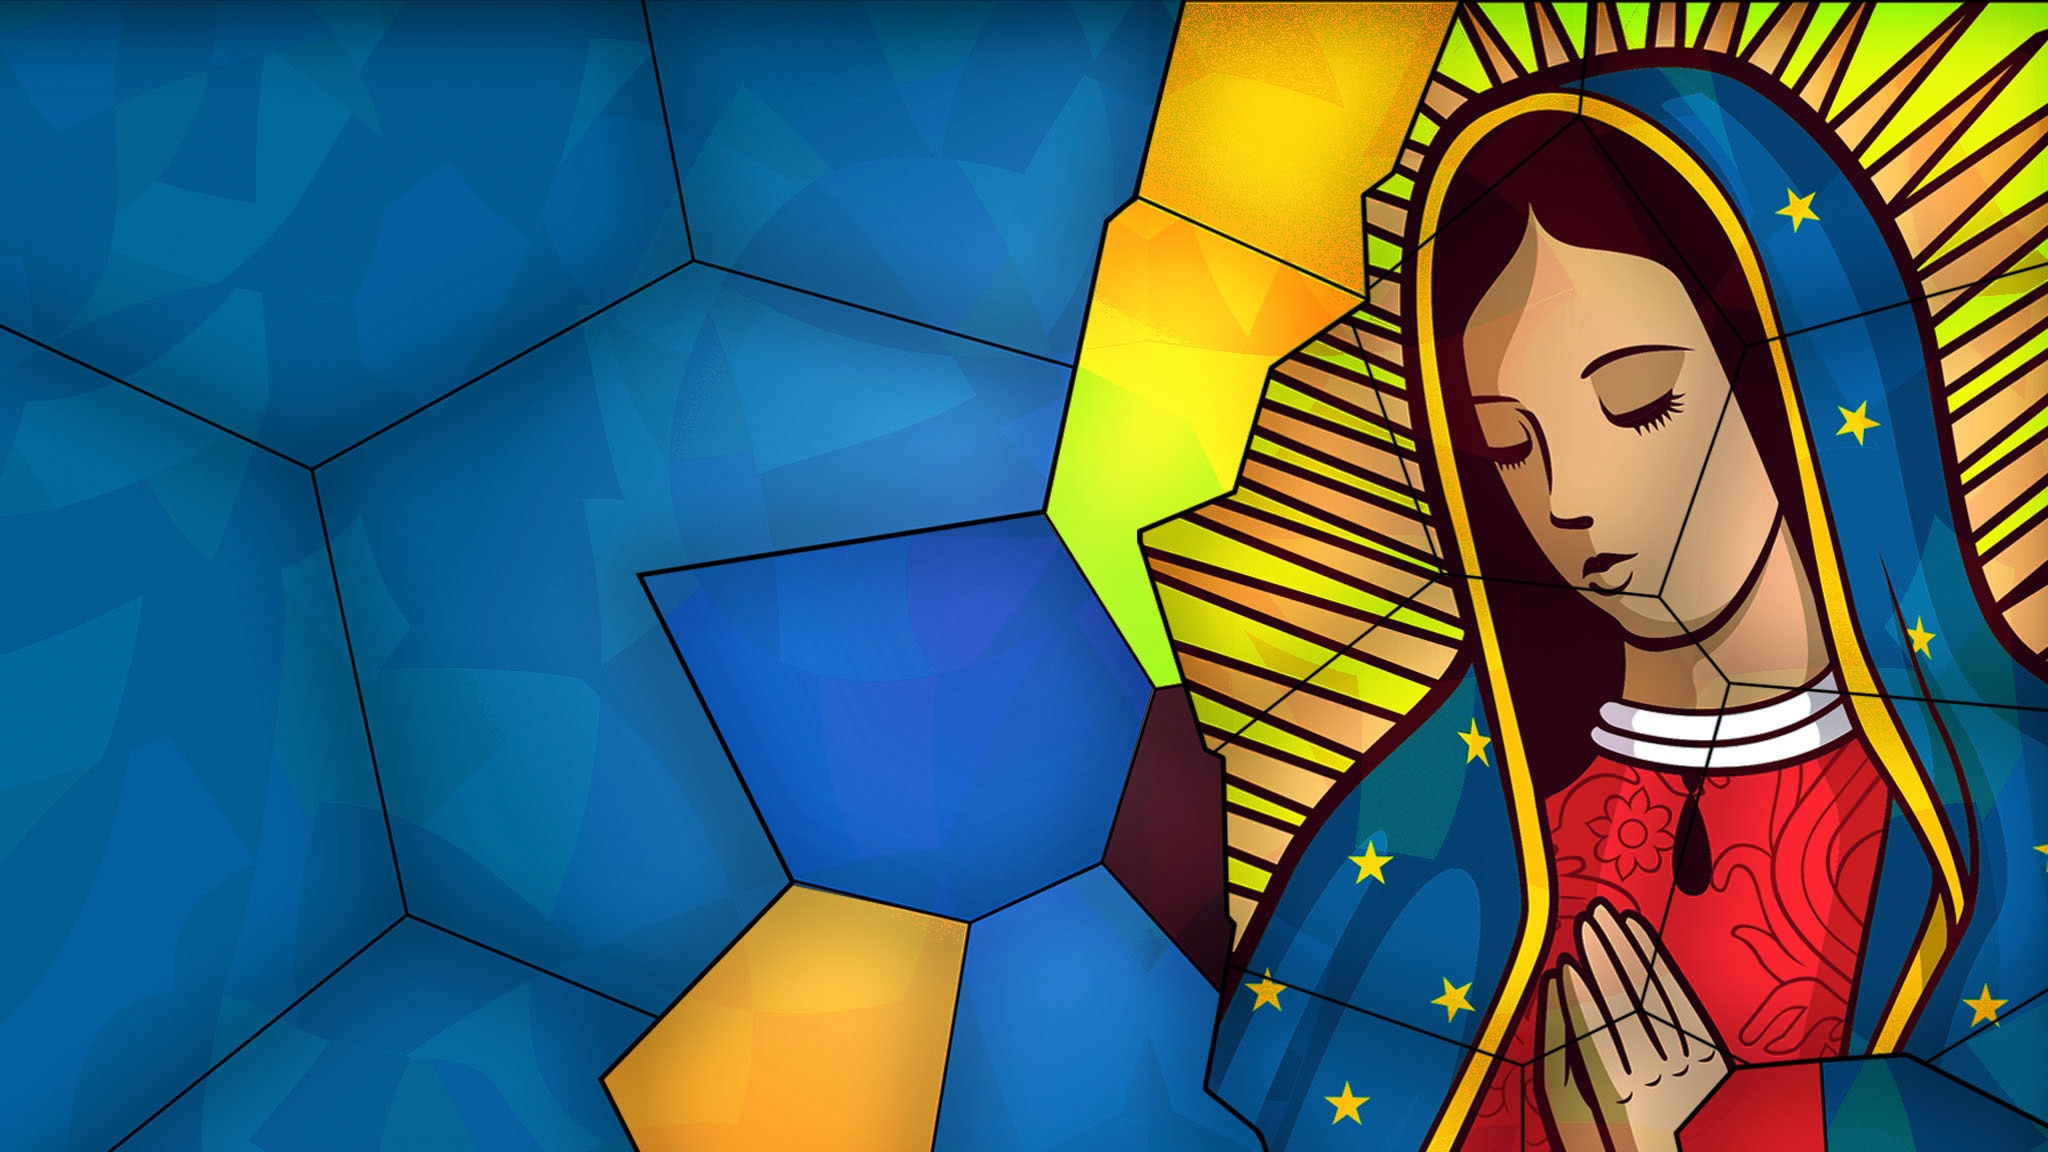 Guadalupe Images  Free Download on Freepik